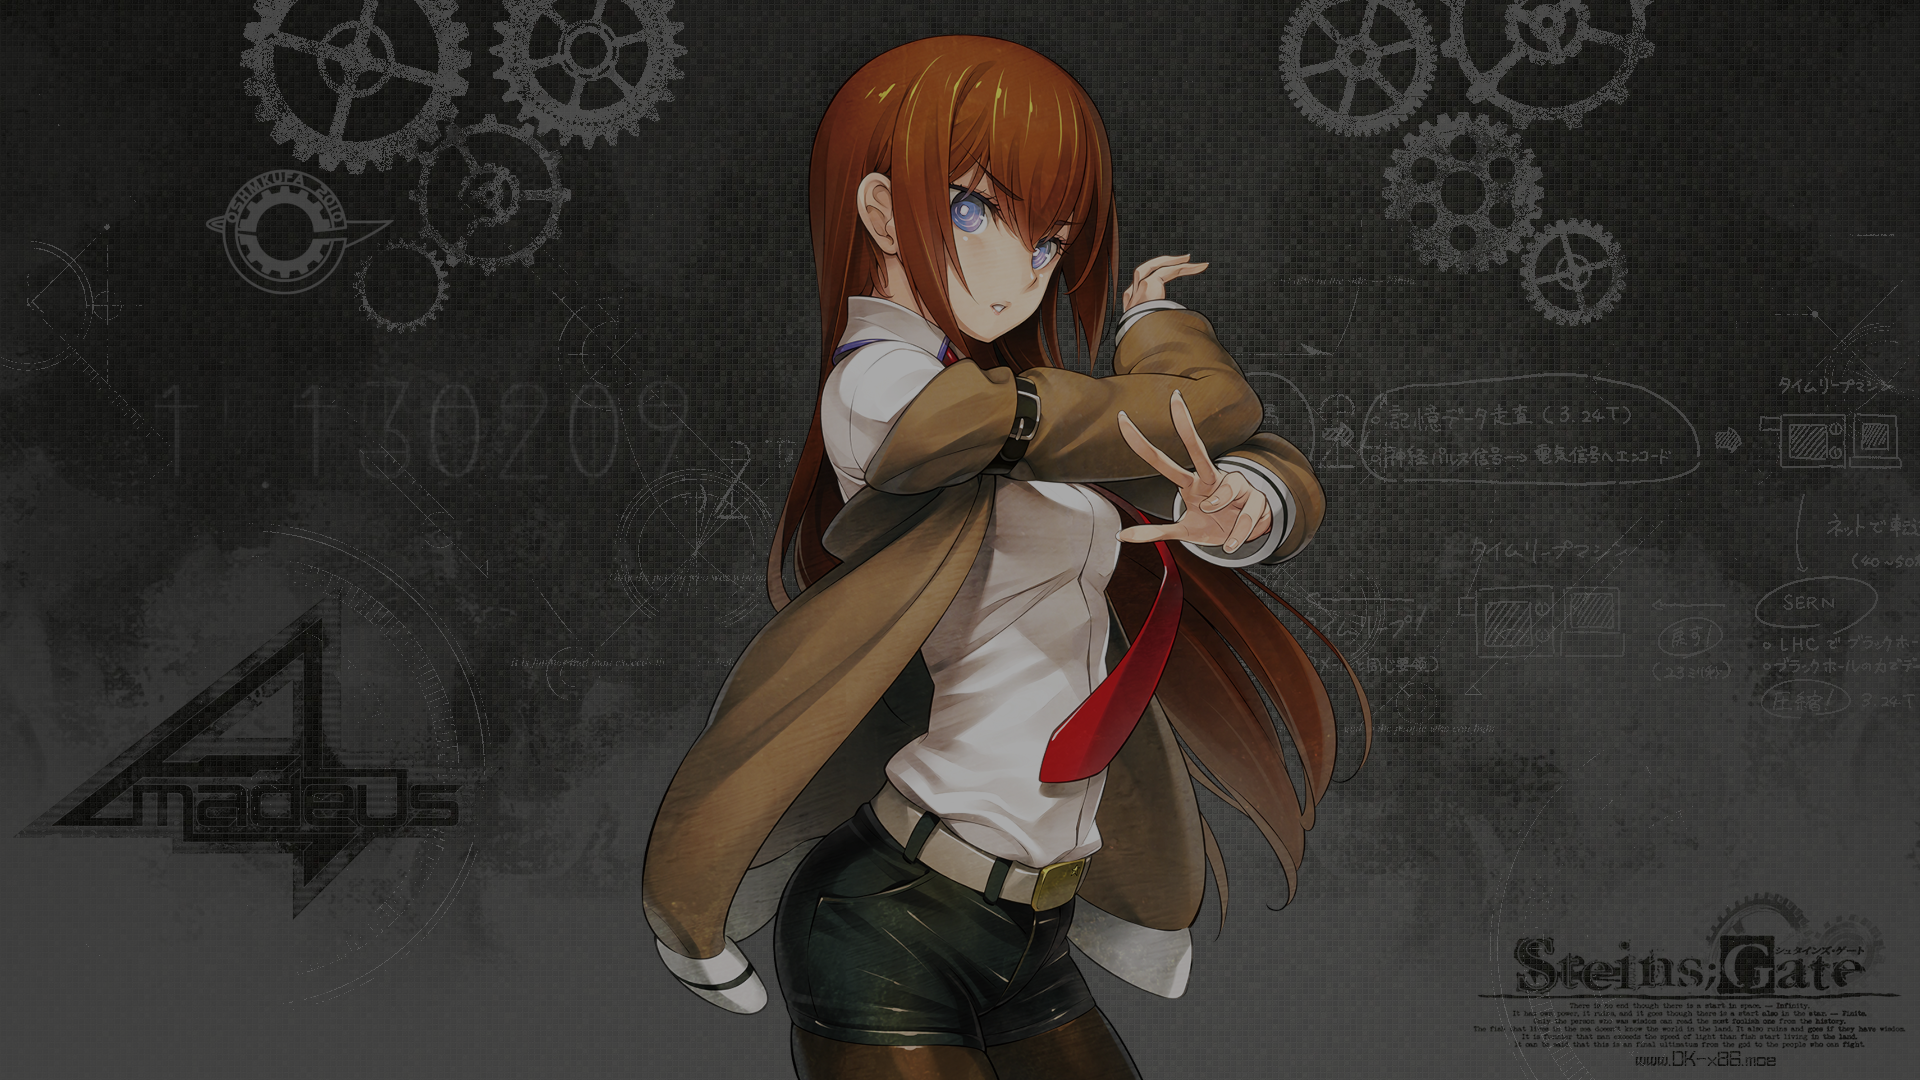 Steins;Gate Wallpapers.